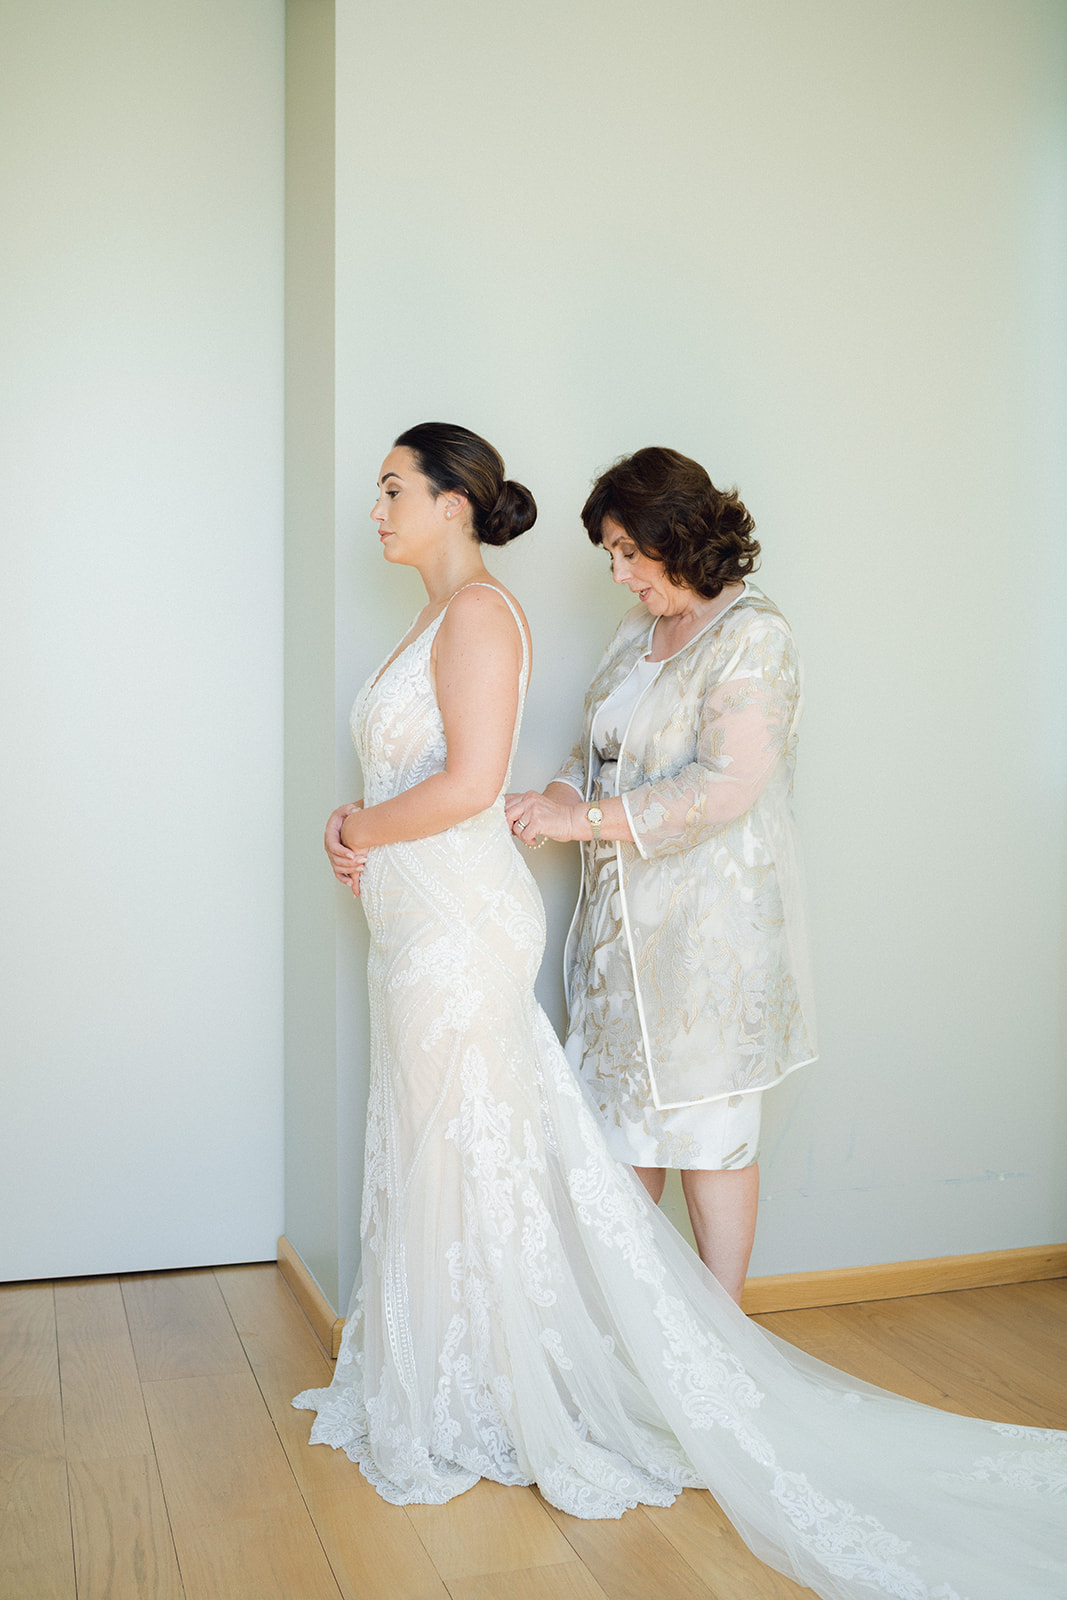 The mother of the bride helps the bride to fasten the dress